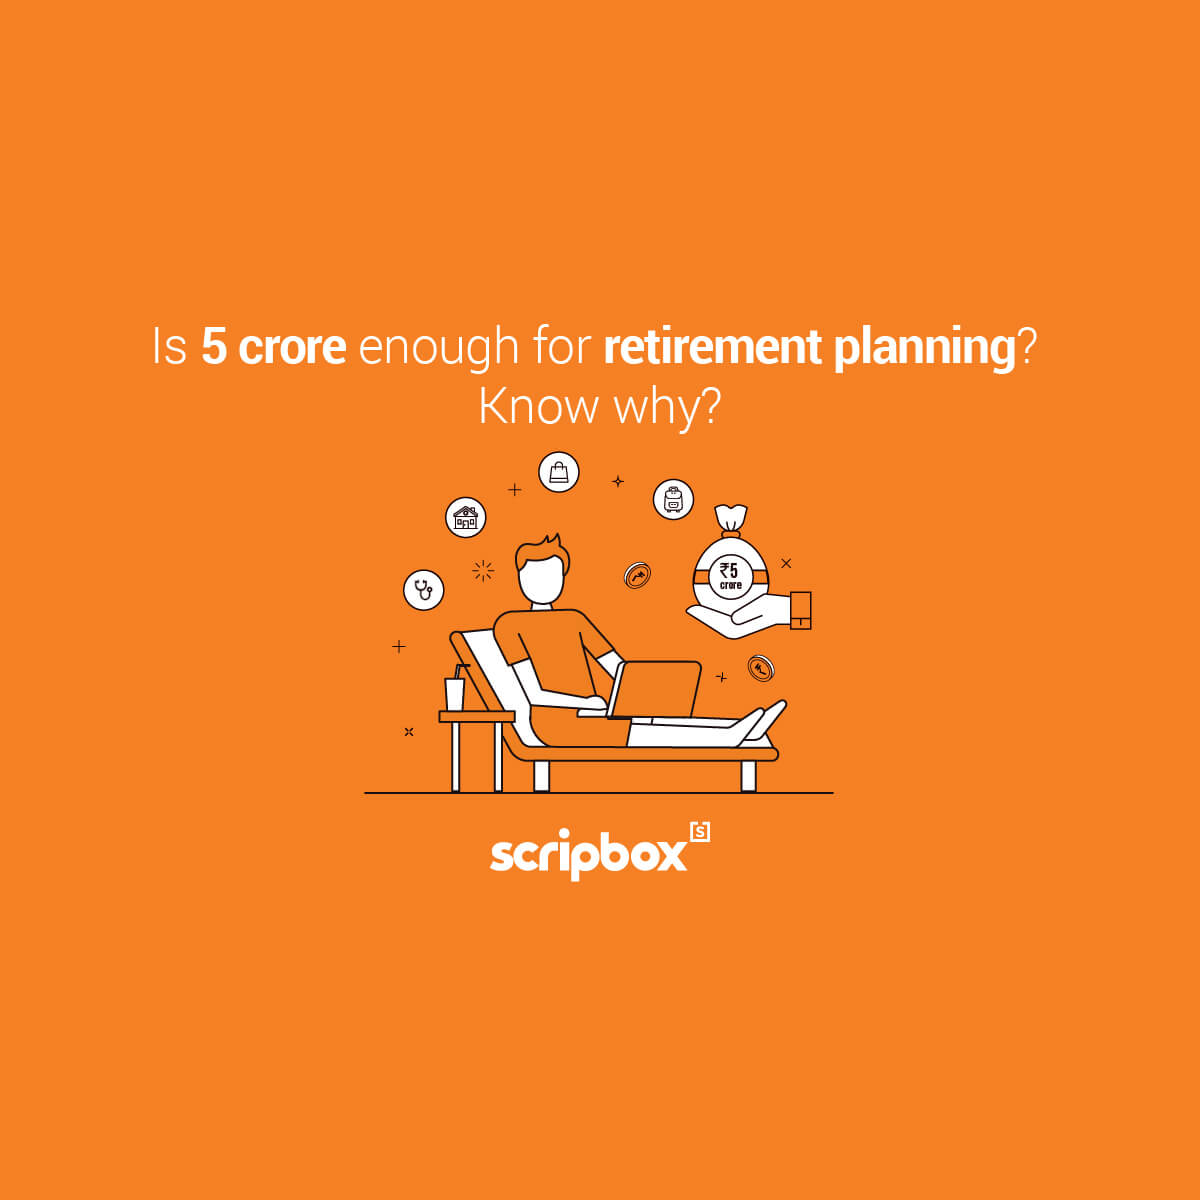 is 5 crore enough for retirement planning